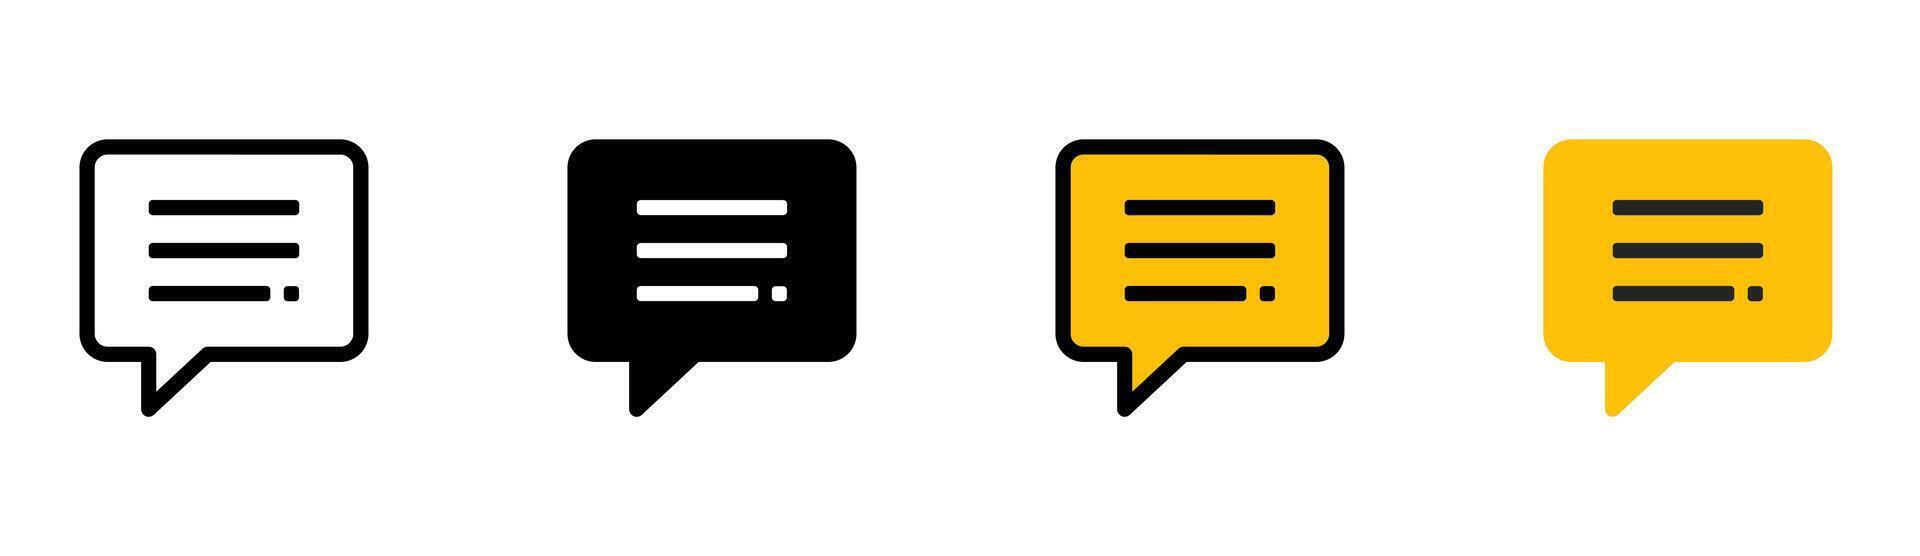 Message icon on white background. Message symbol. chat, comment, communication, write. flat and colored styles. for web and mobile design. vector